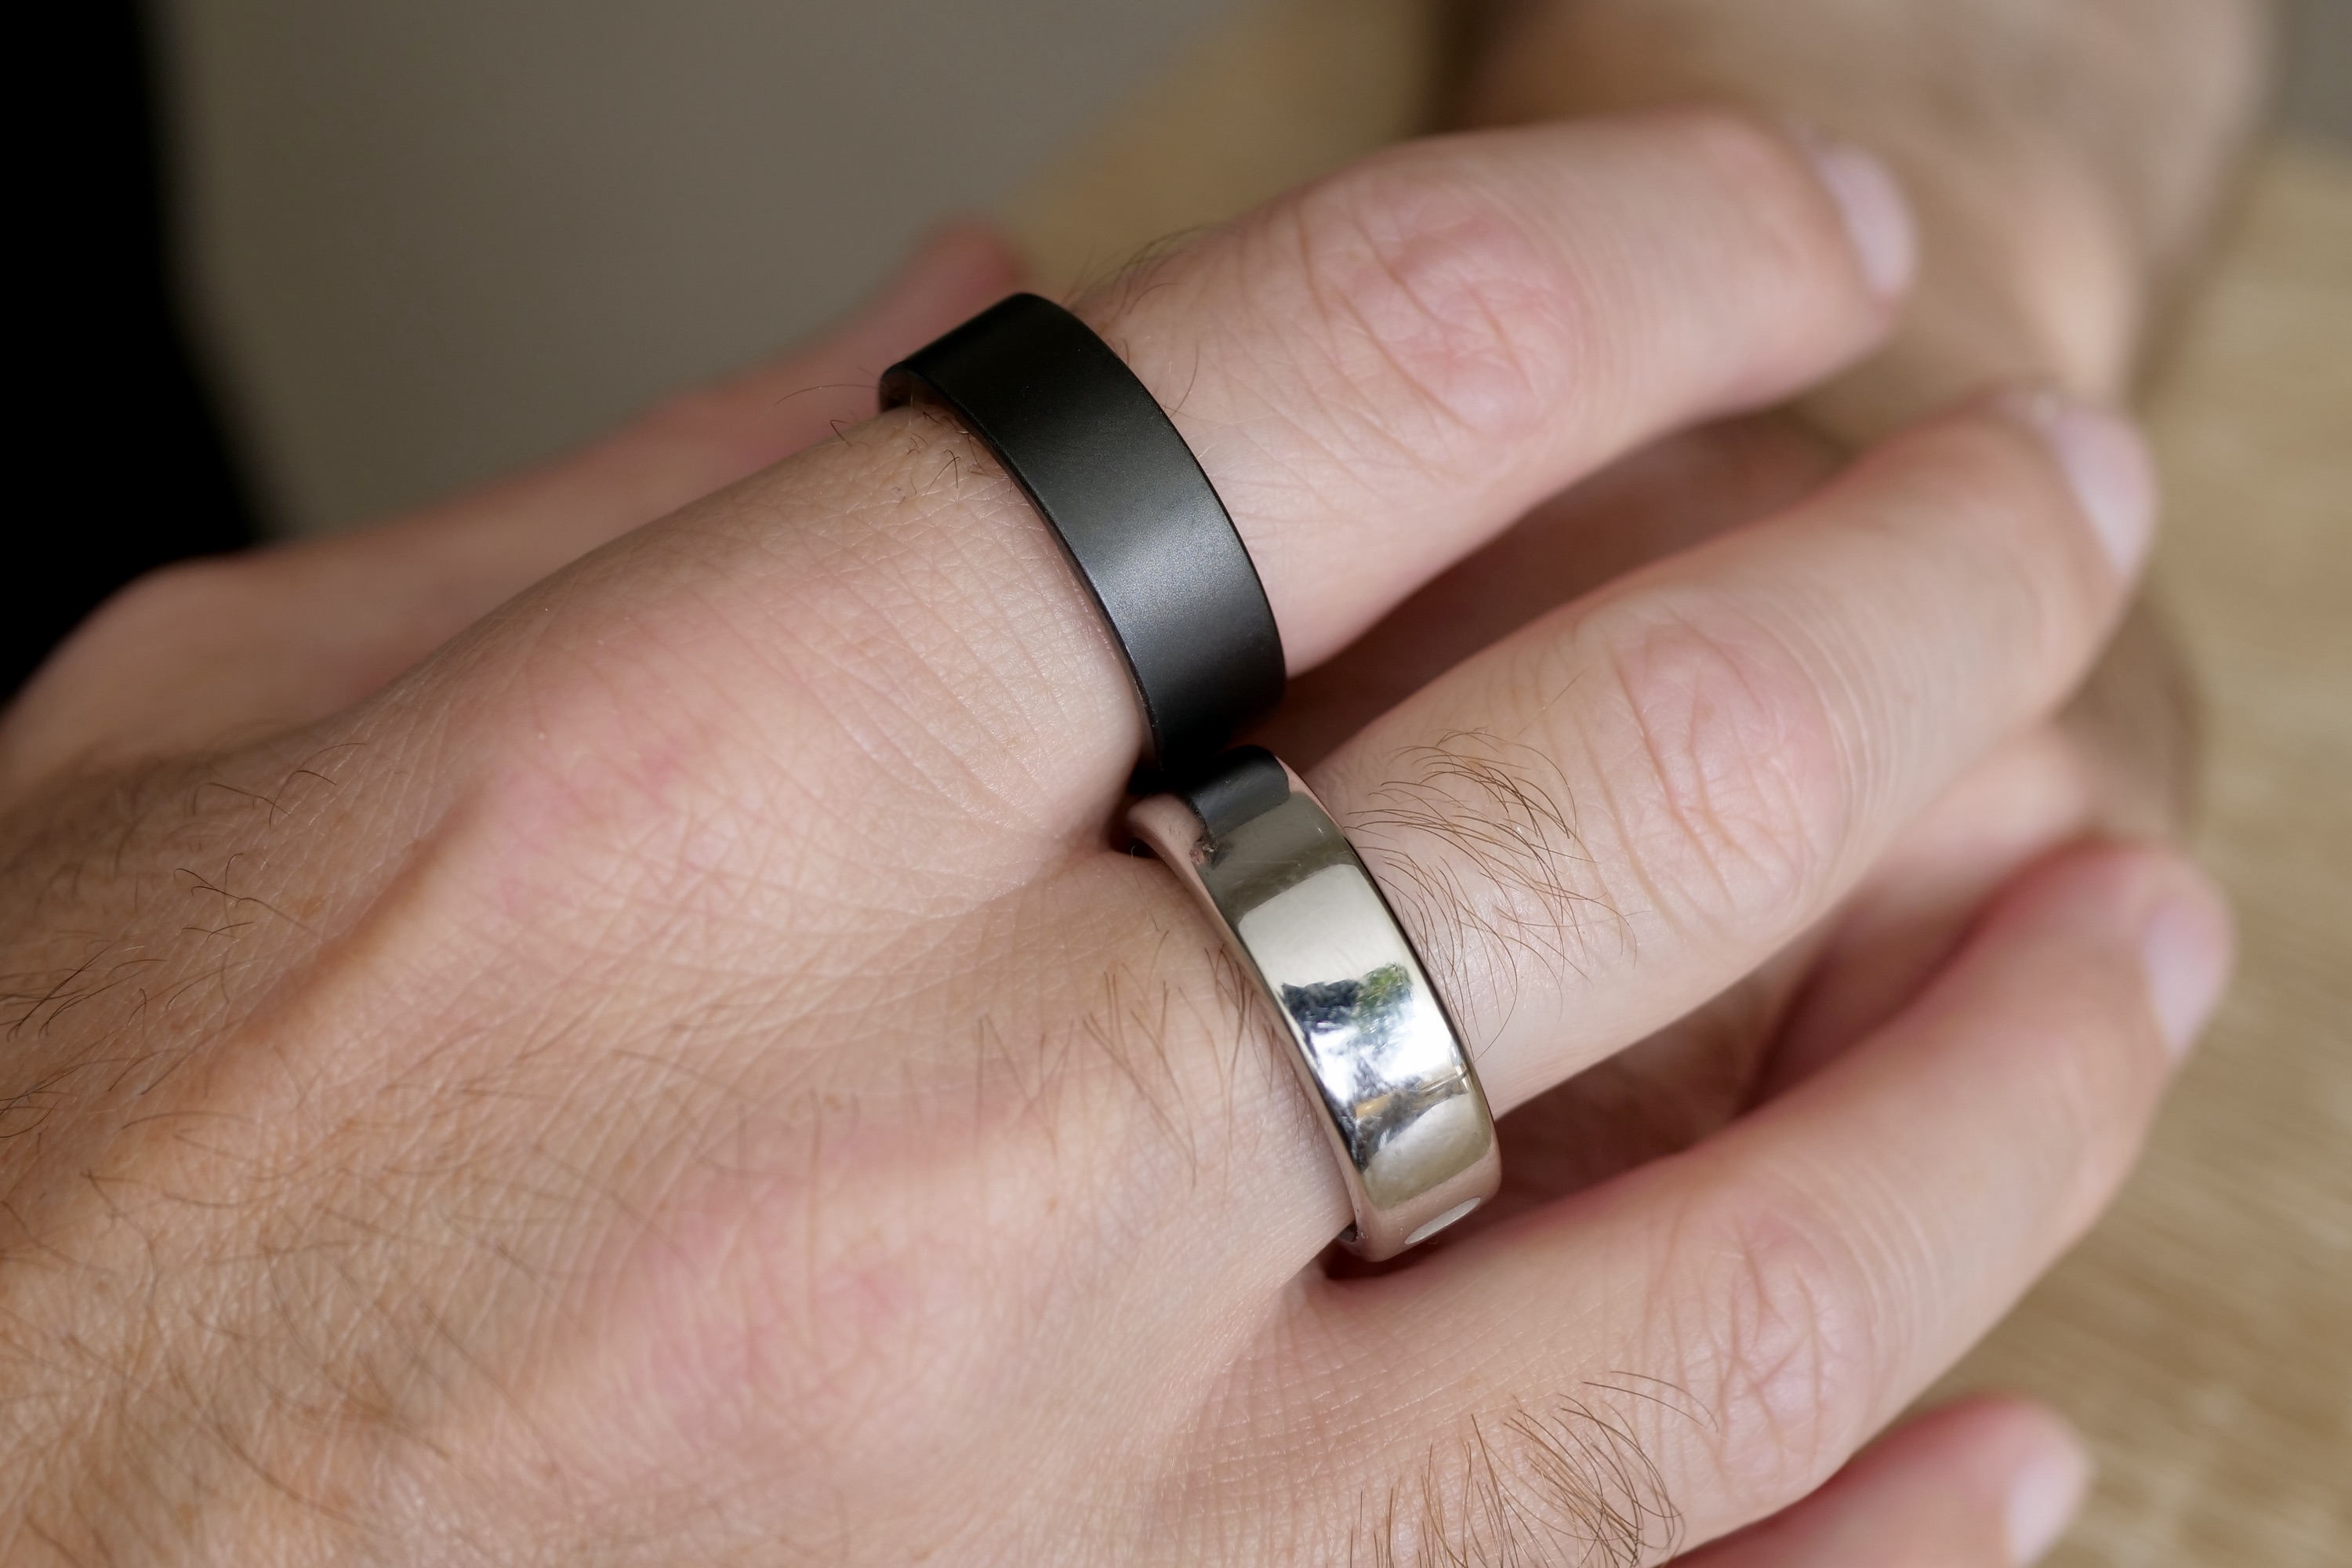 Ultrahuman Ring Air: A balanced look at its wellness features